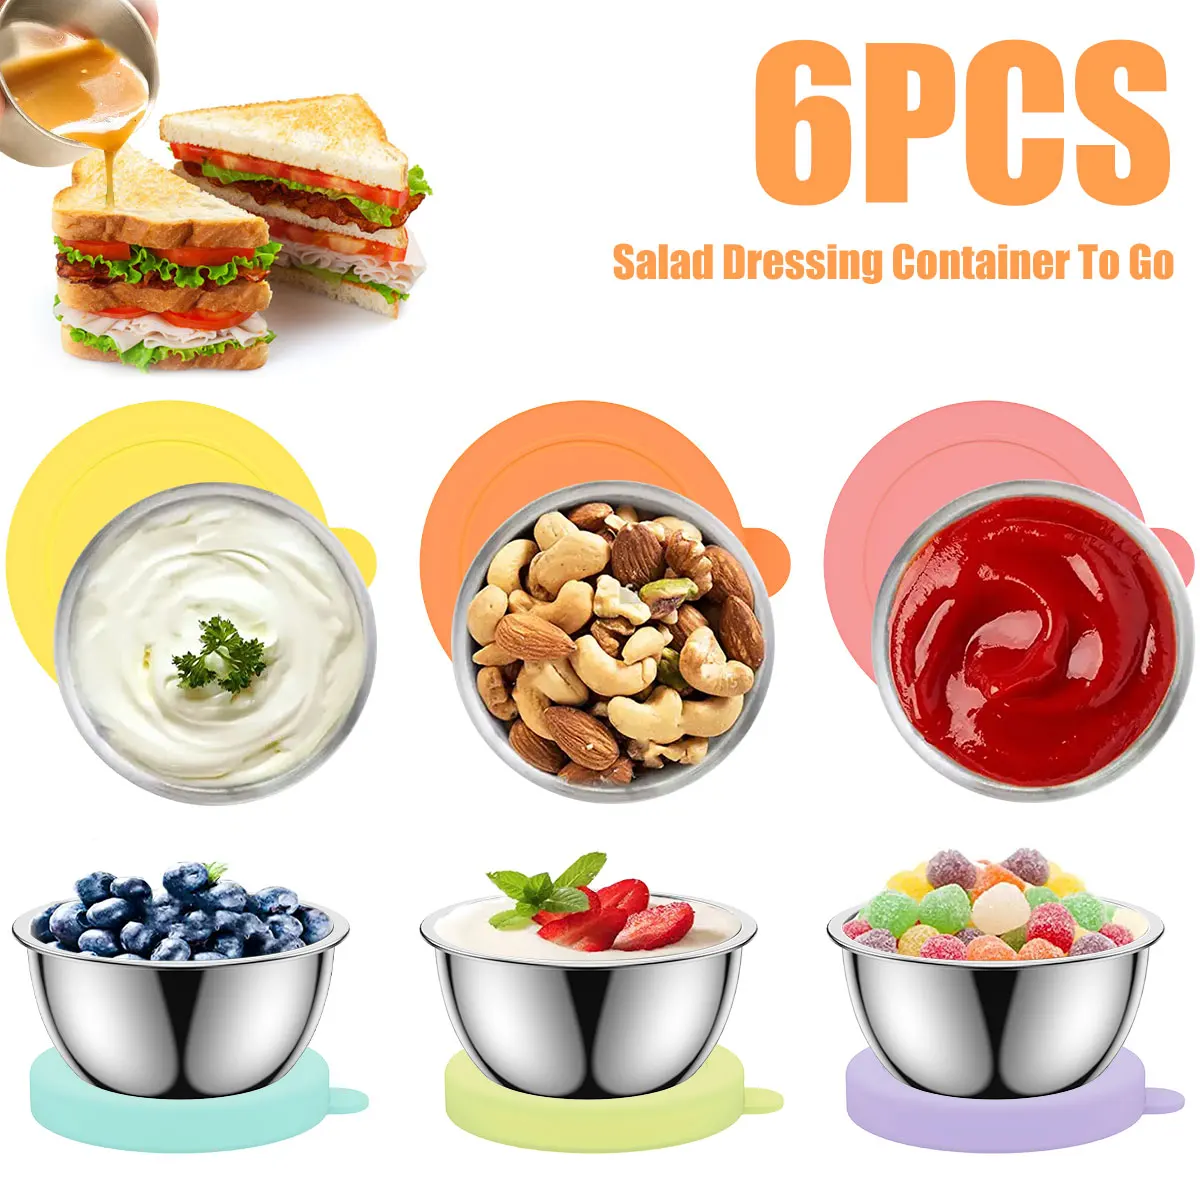 

6Pcs Salad Dressing Container 1.7 oz Reusable Silicone Lid Sauce Dressing Container Leak Proof 304 Stainless Steel Dipping Sauce